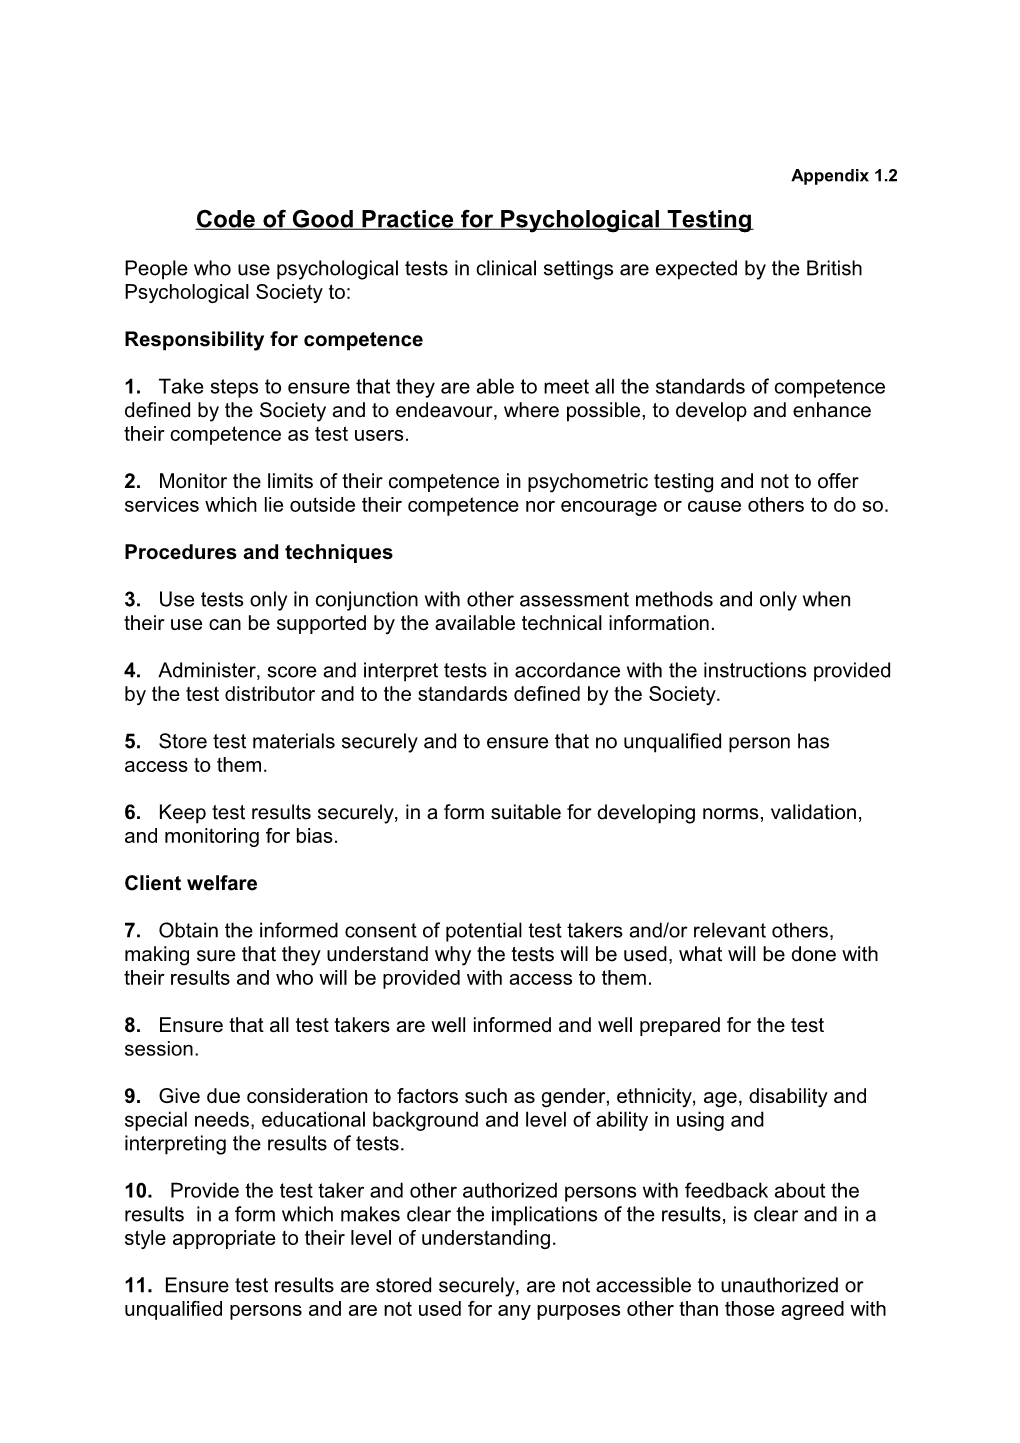 Code of Good Practice for Psychological Testing